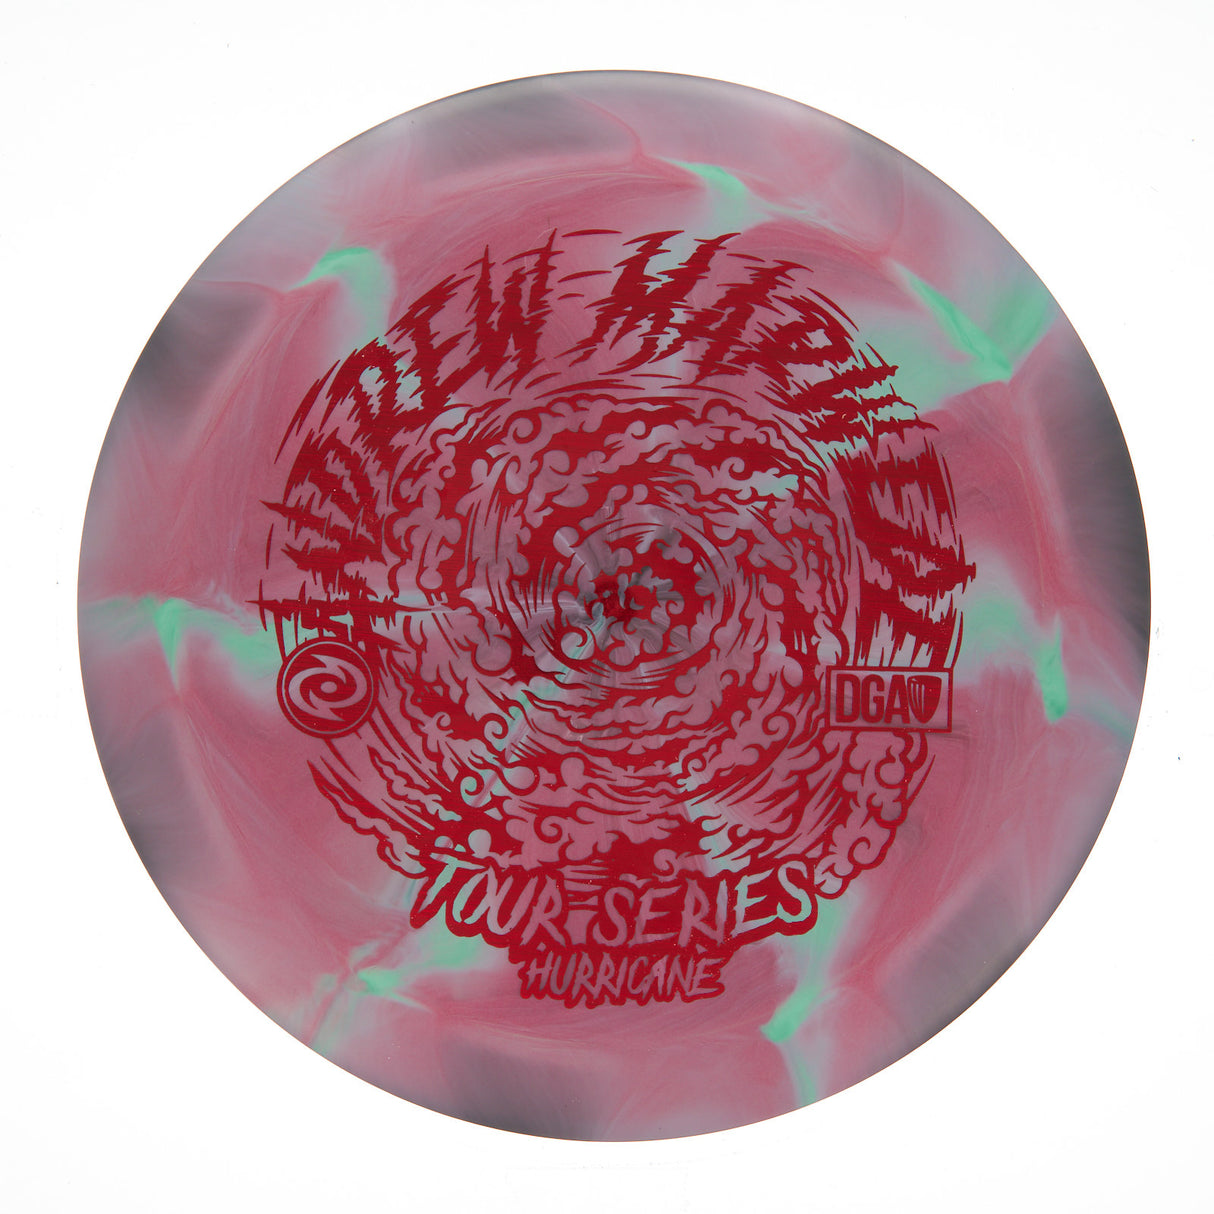 DGA Hurricane - 2022 Andrew Marwede Tour Series Swirl 176g | Style 0009